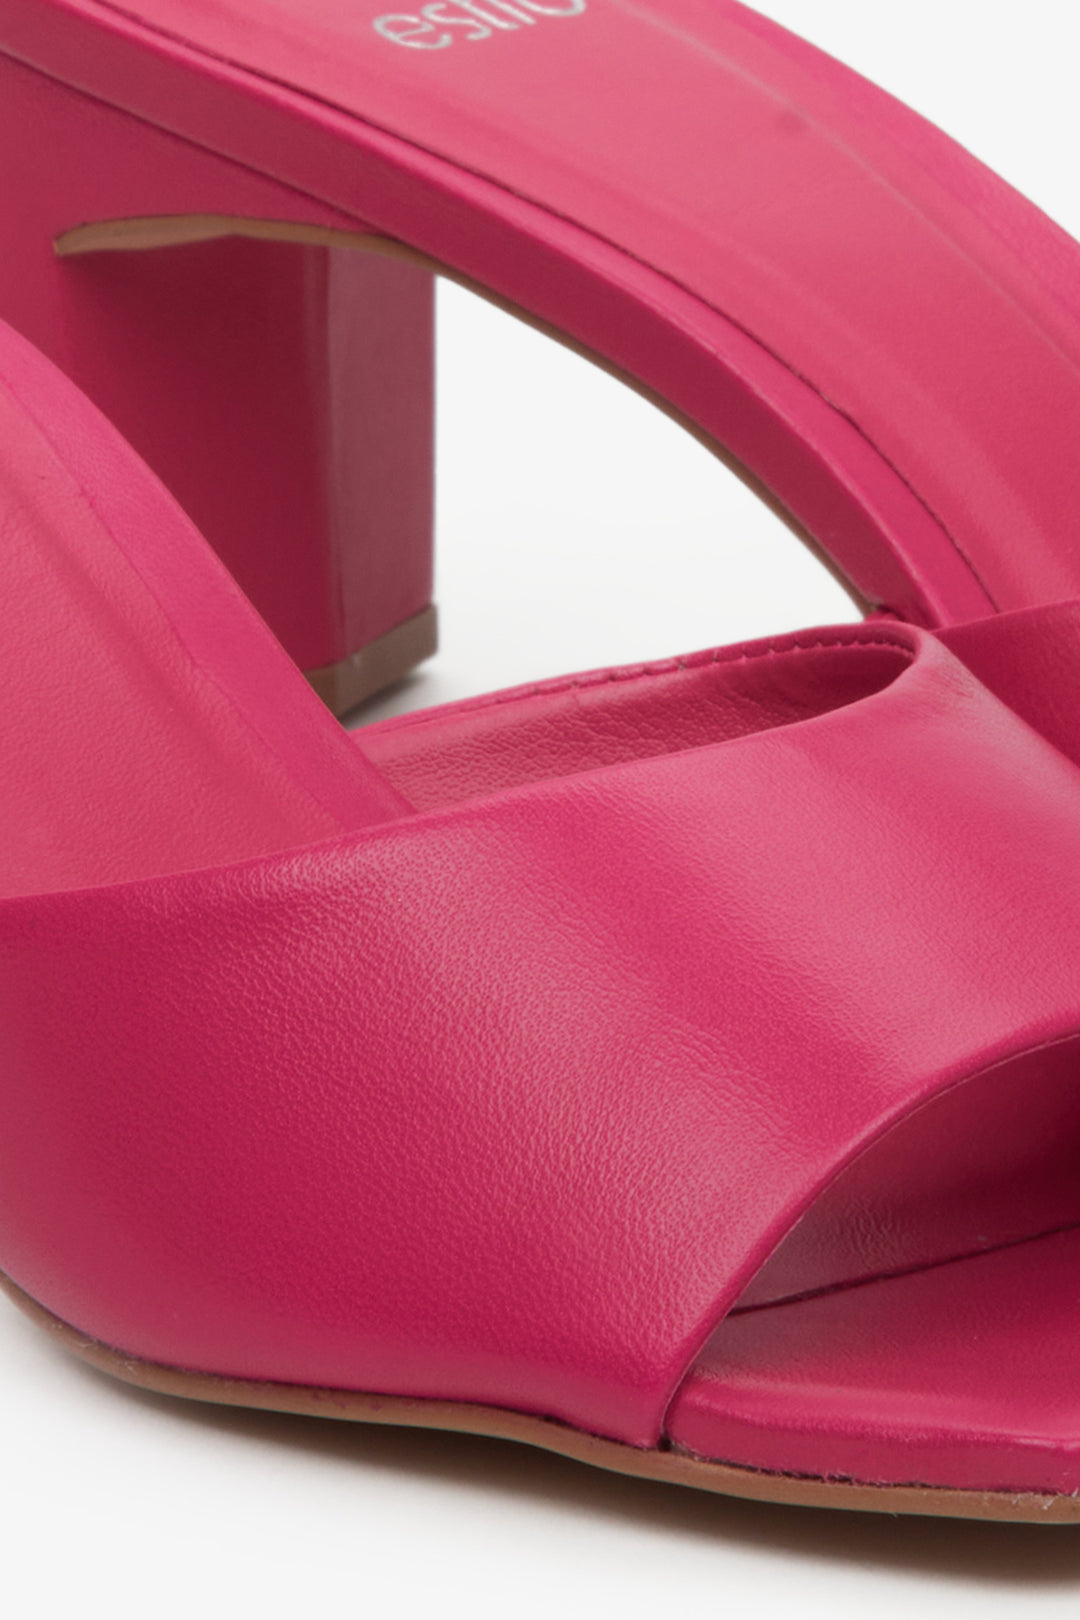 Women's pink leather mules with a sturdy block heel by Estro - close-up on details.